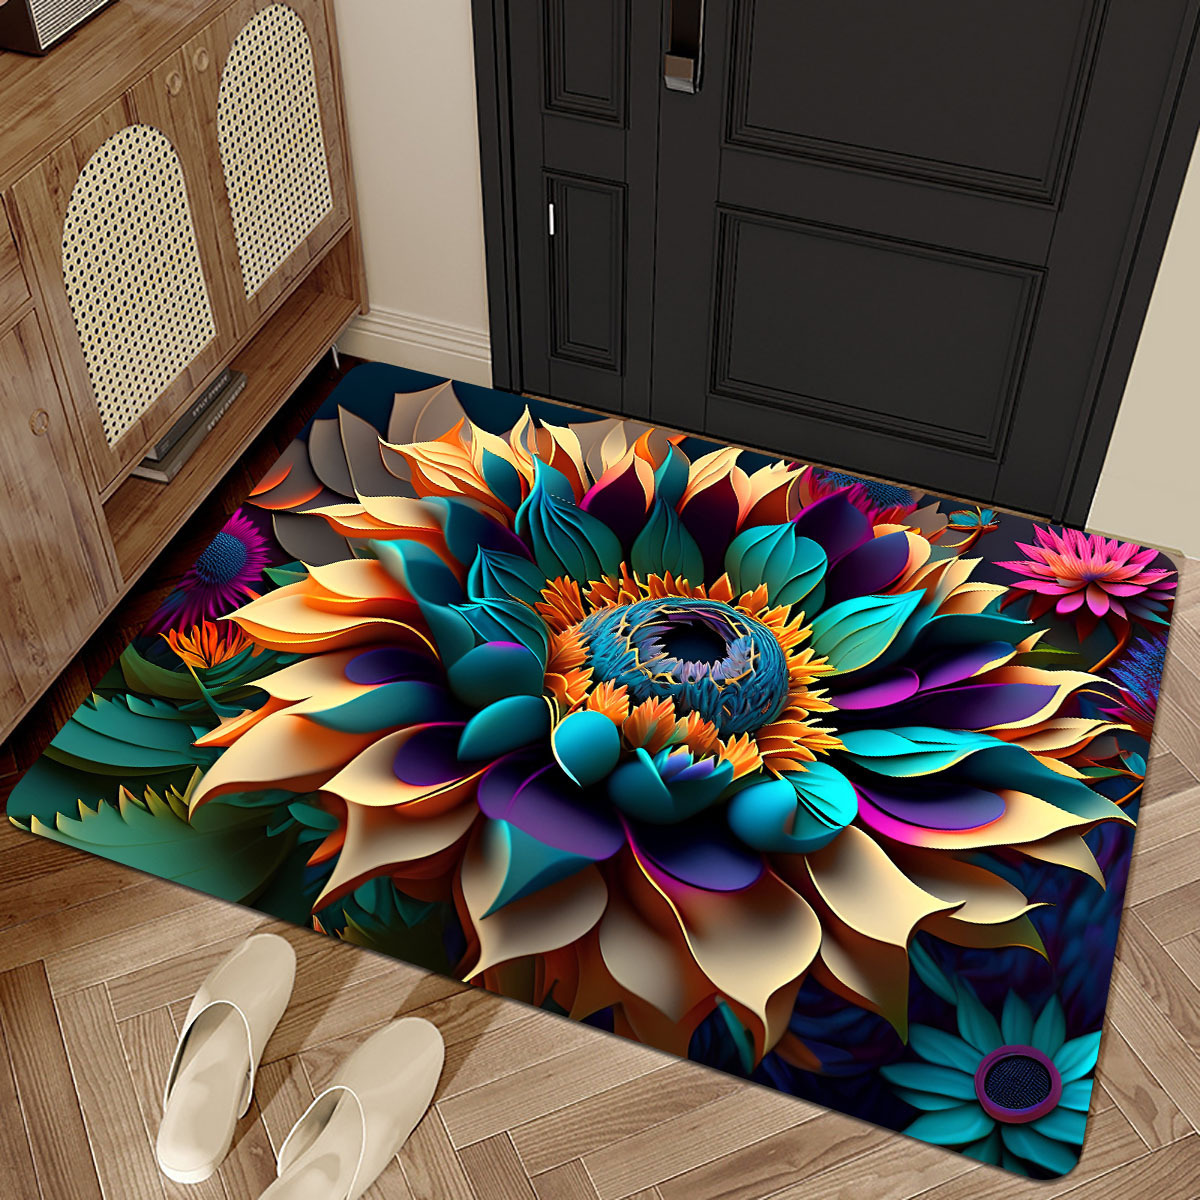 

Luxury Floral Door Mat With Non-slip Silicone Backing - Thick, Easy-care Flannel Entrance Rug For Home Decor - Perfect For Living Room, Bedroom, Bathroom, Kitchen